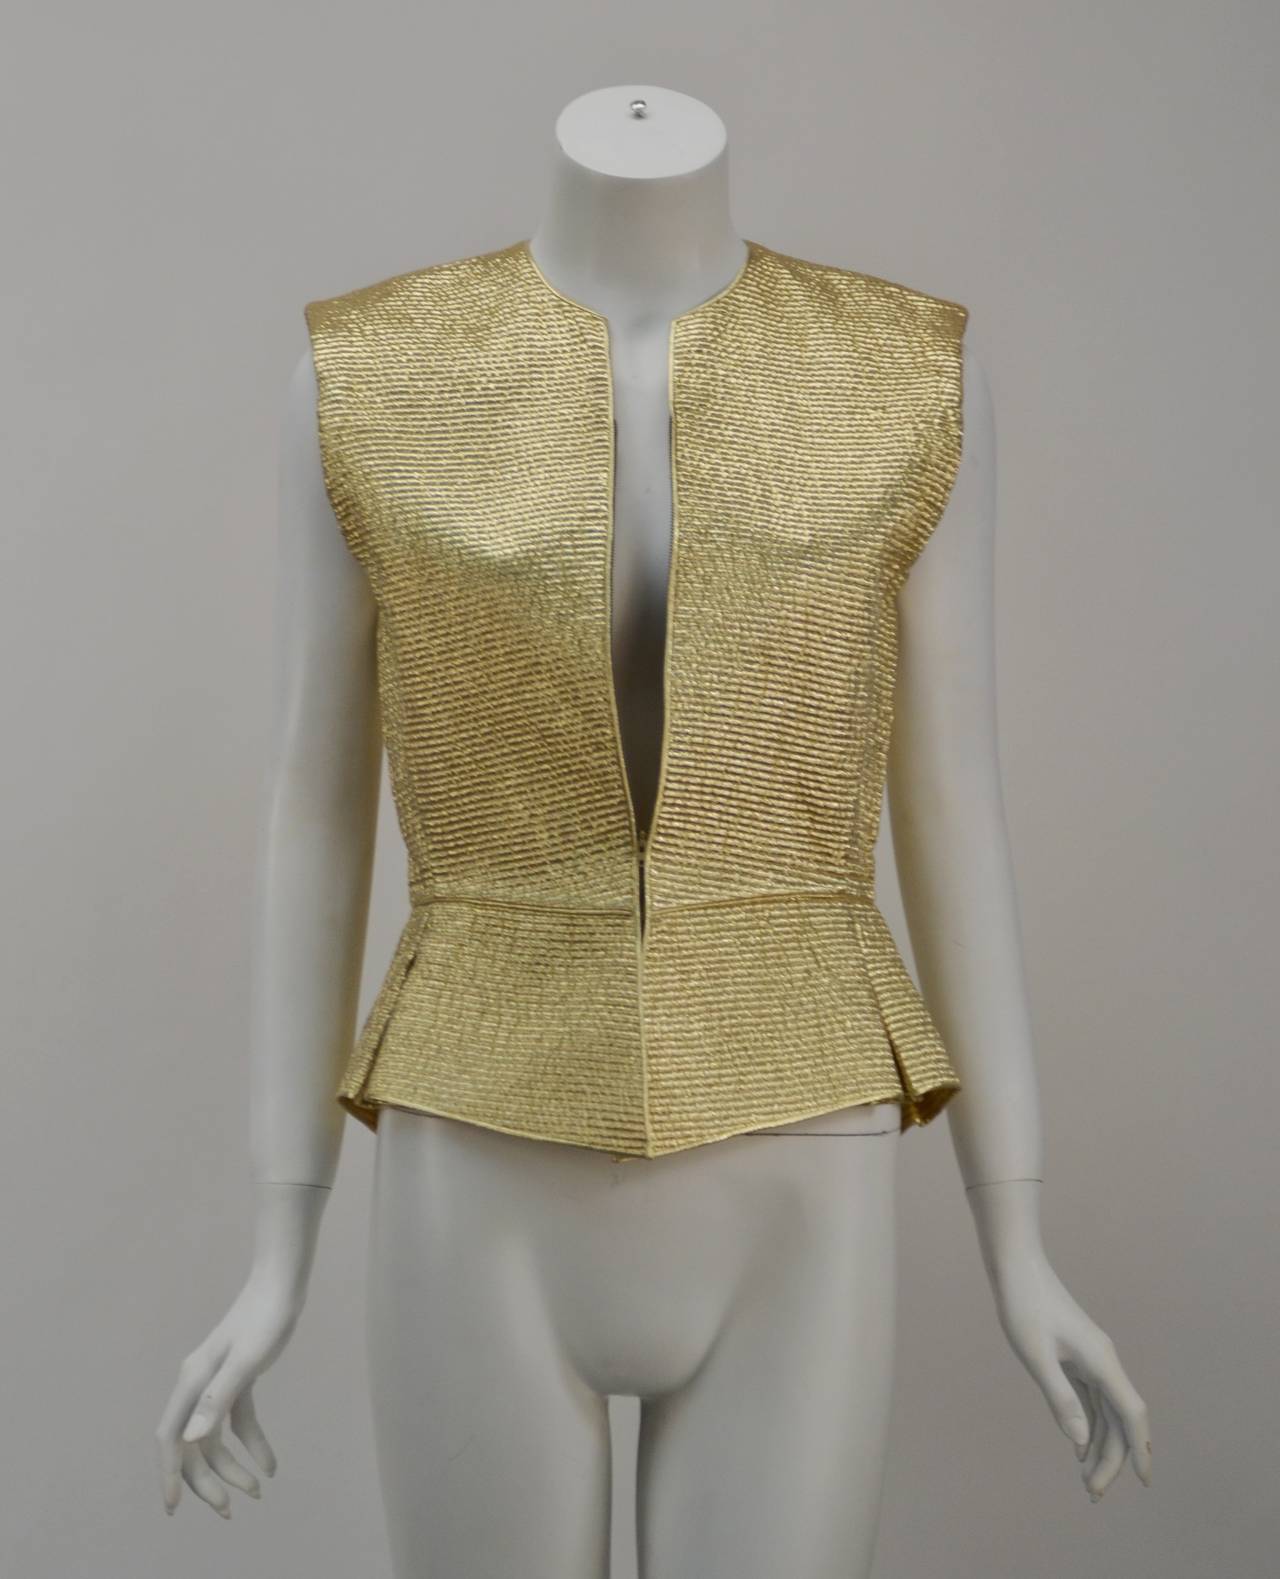 Mary McFadden is known for her exotic designs. This quilted gold peplum top is no exception. Dress it up or down. Wear as vest or a top.  Zipper front and sleeveless. Add a pair of jeans and platforms, a pencil skirt and peep toes or even shorts and